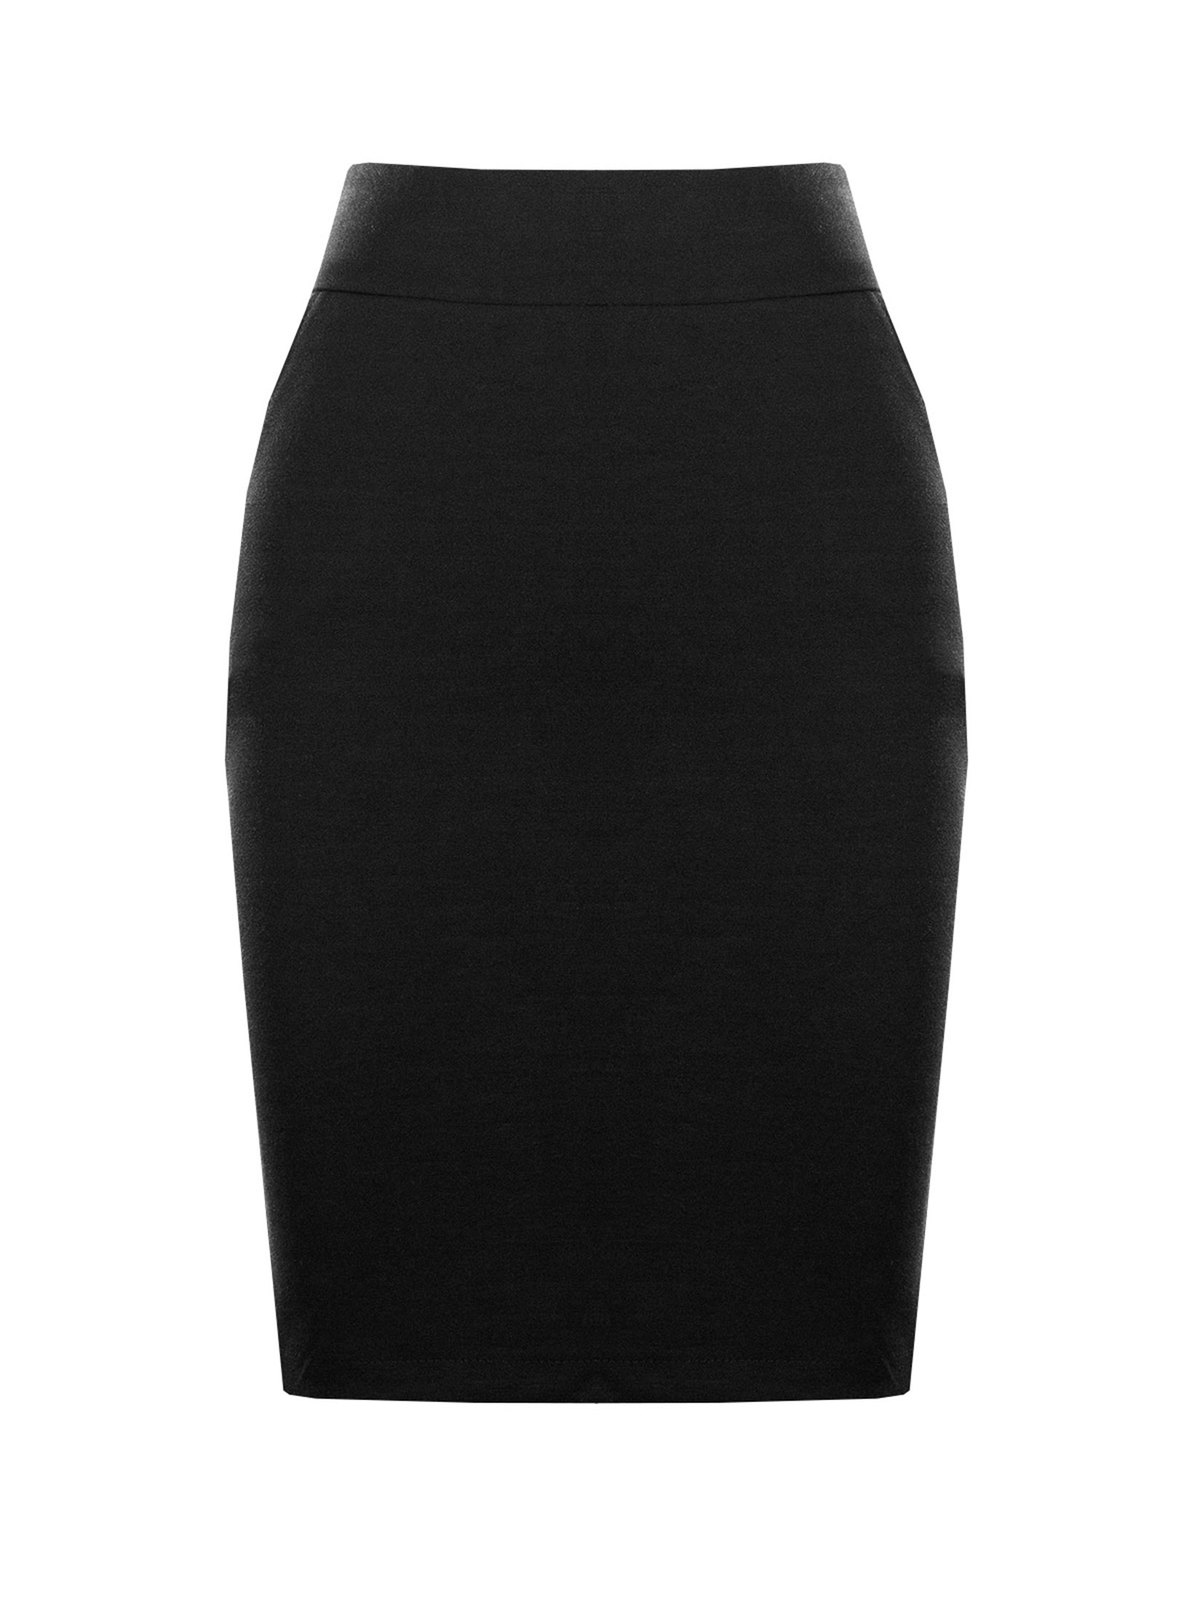 TXM Woman's LADY'S SKIRT (CASUAL)